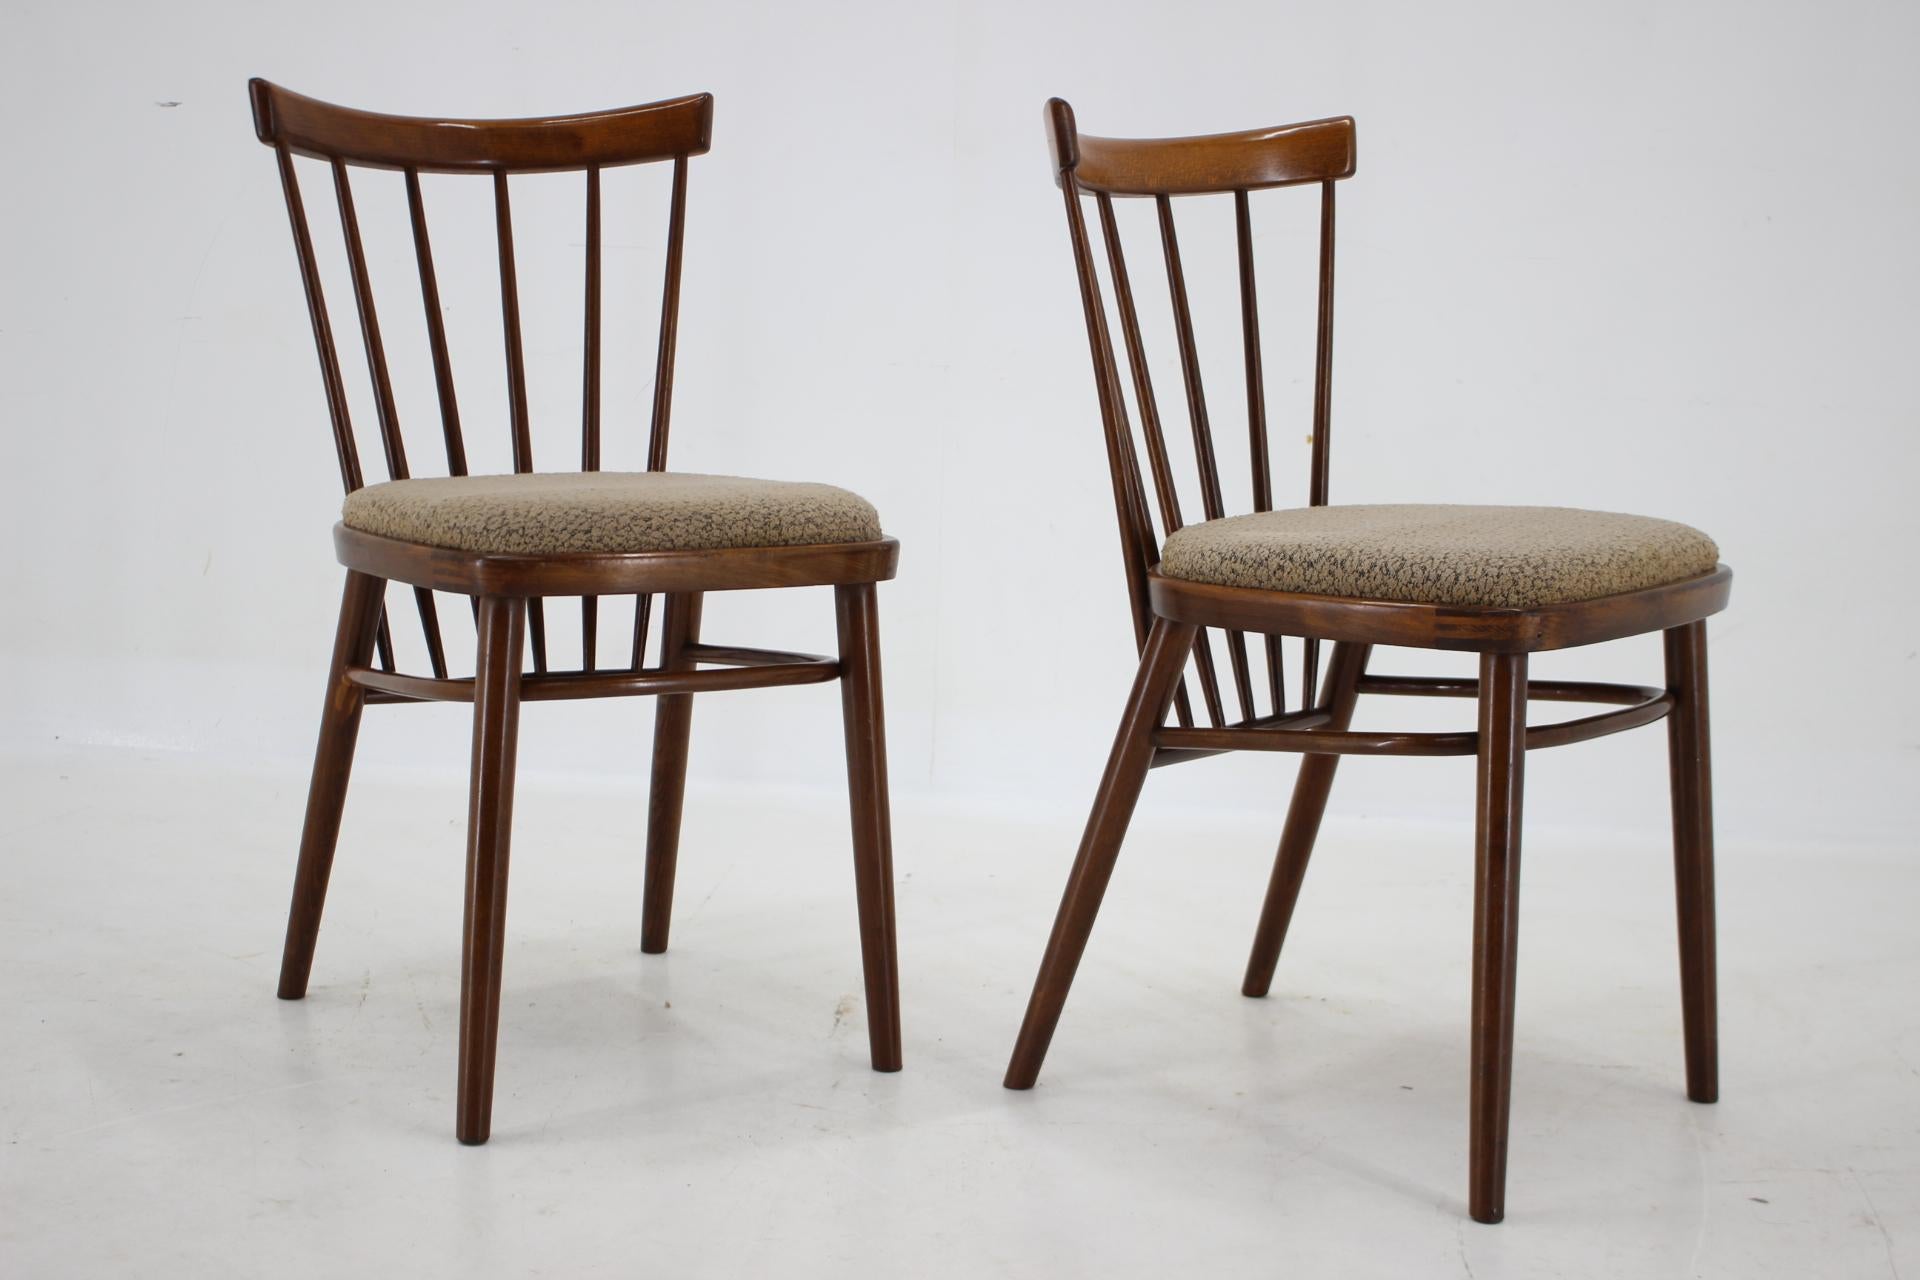 1960s Set of 4 Dining Chairs by Tatra, Czechoslovakia In Good Condition For Sale In Praha, CZ